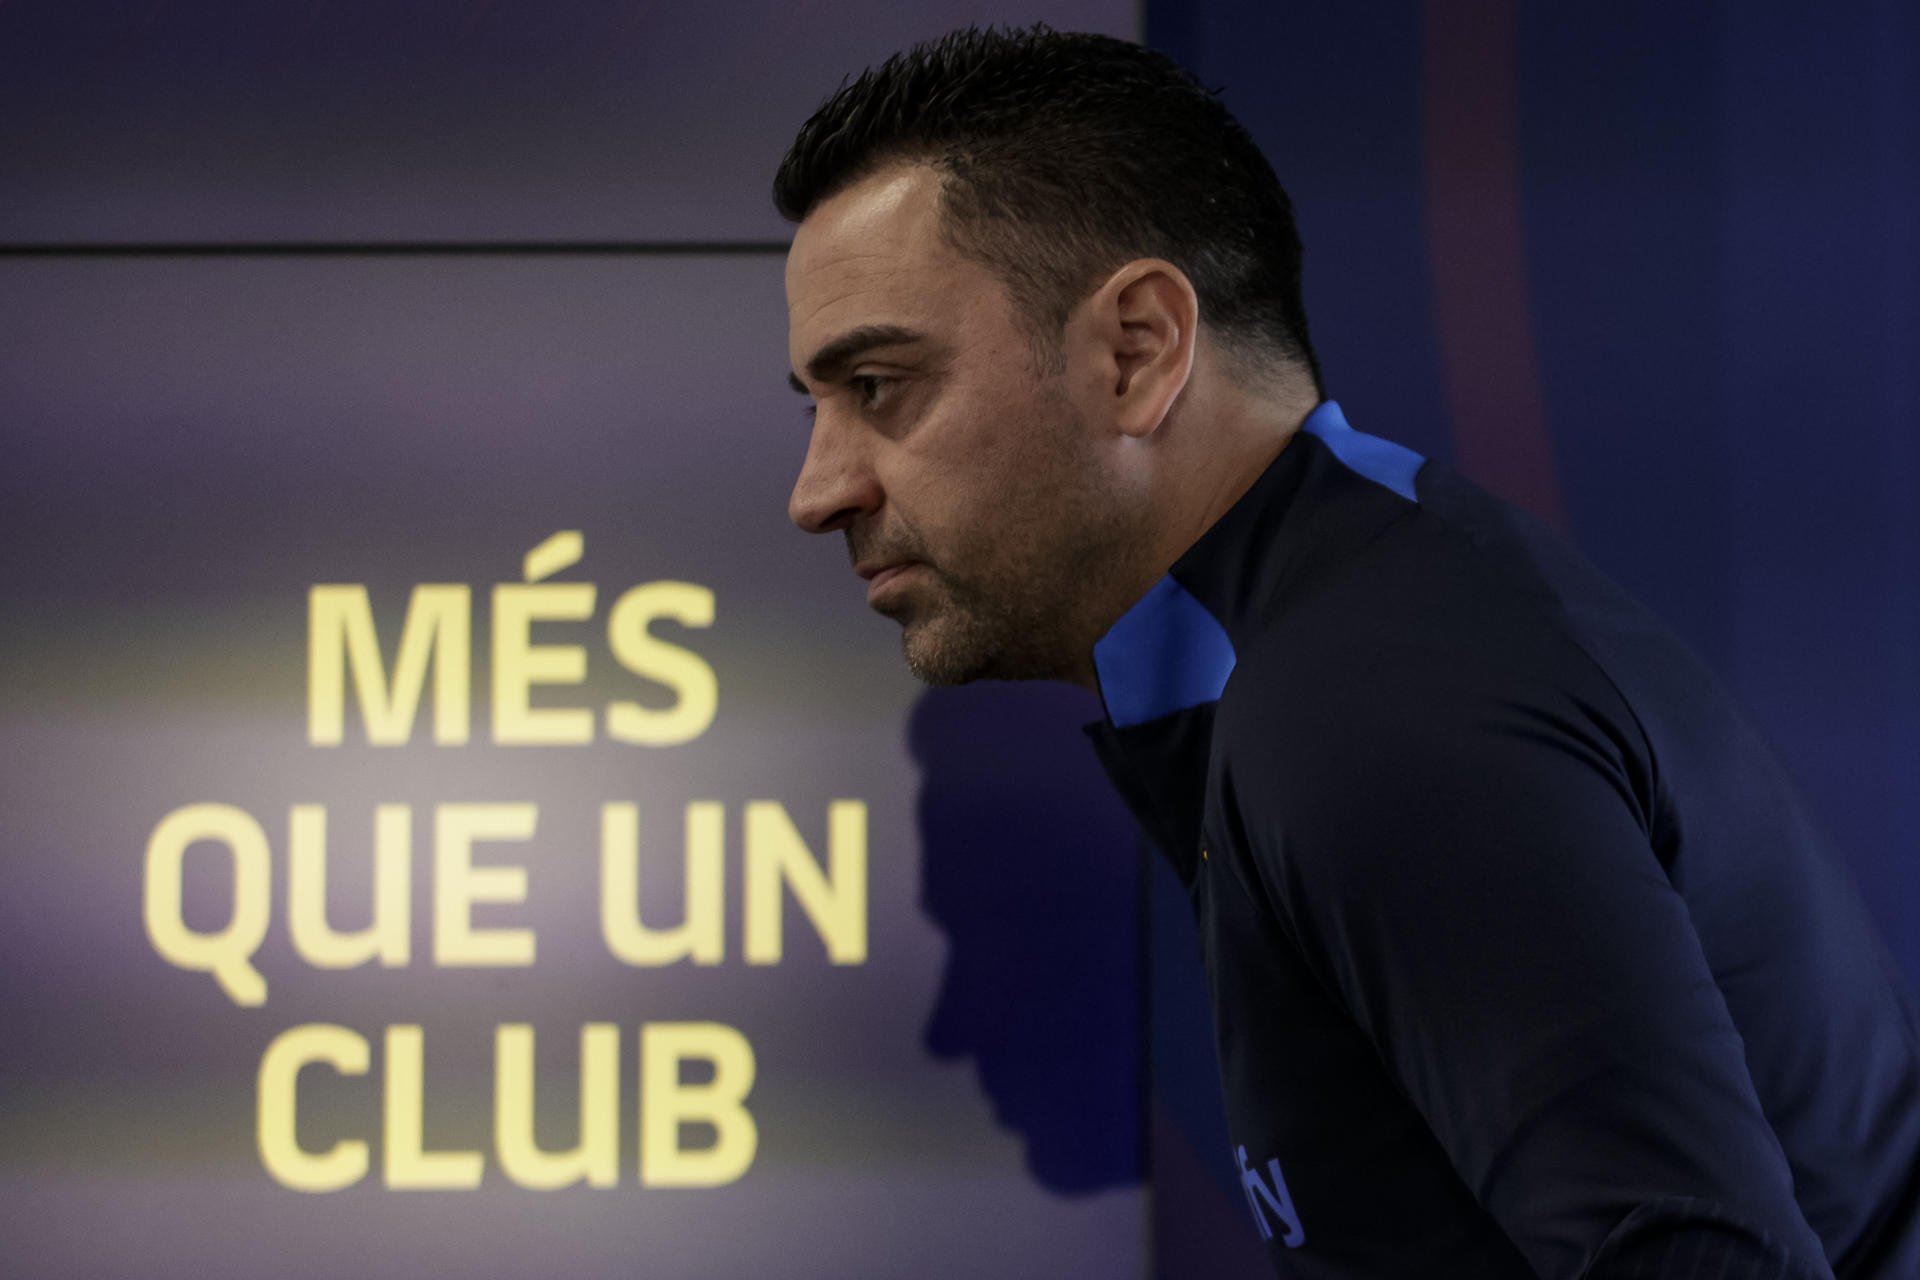 The coach of FC Barcelona, ​​Xavi Hernández, at a press conference.